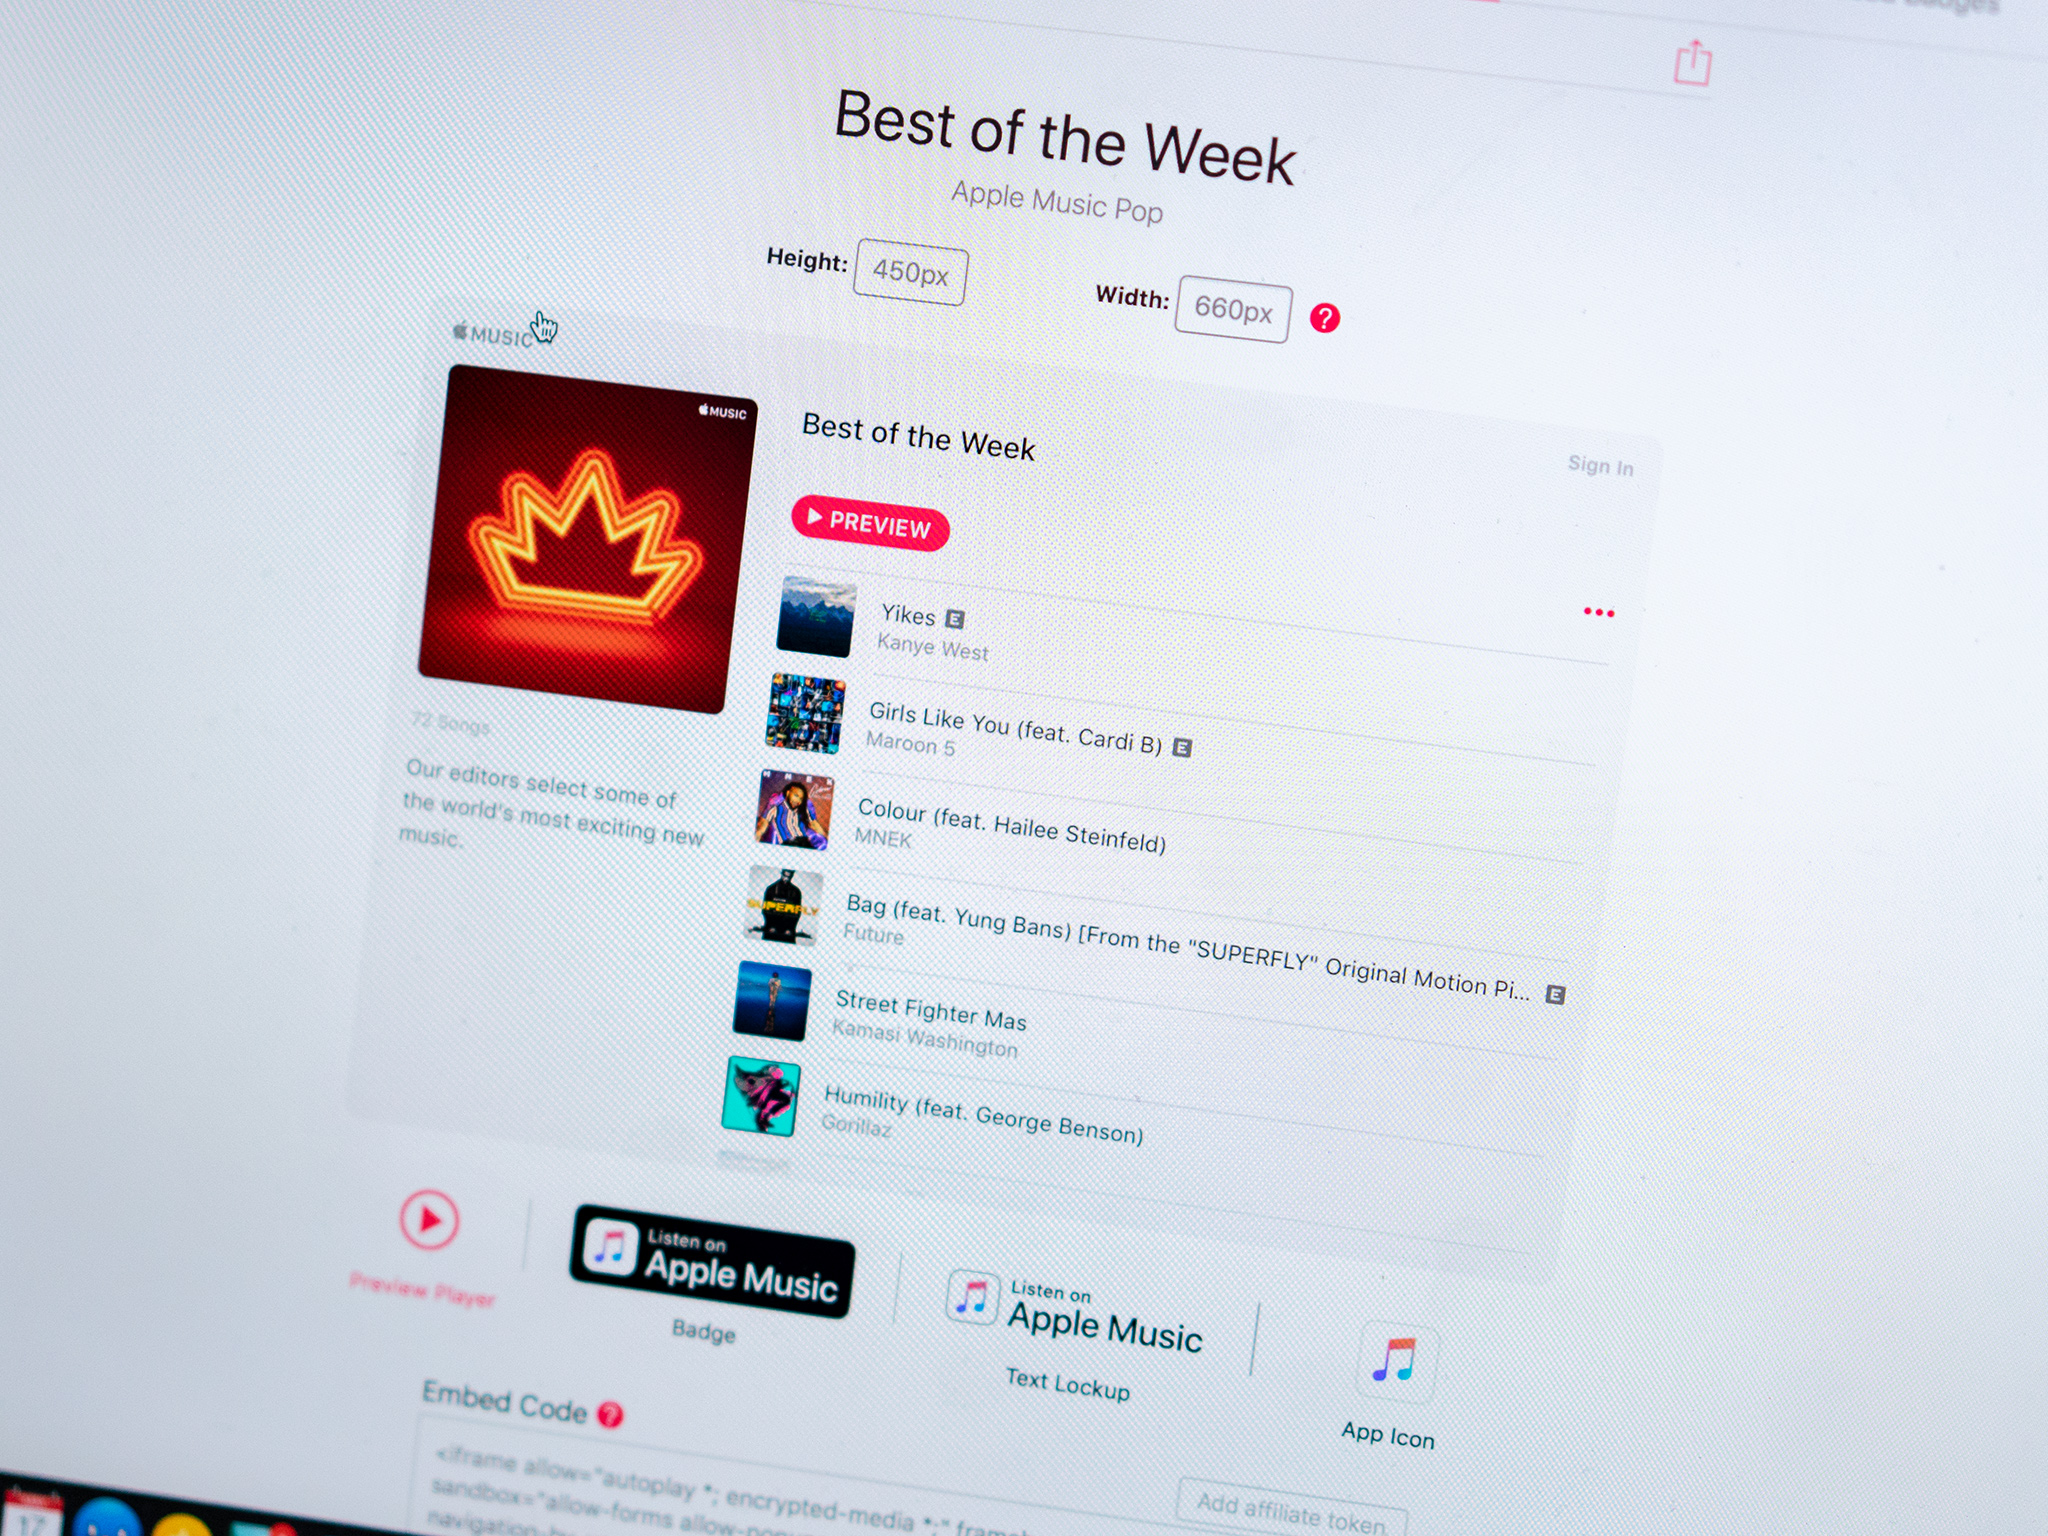 Embeddable Apple Music widget lets subscribers sign in to listen to full songs on the web